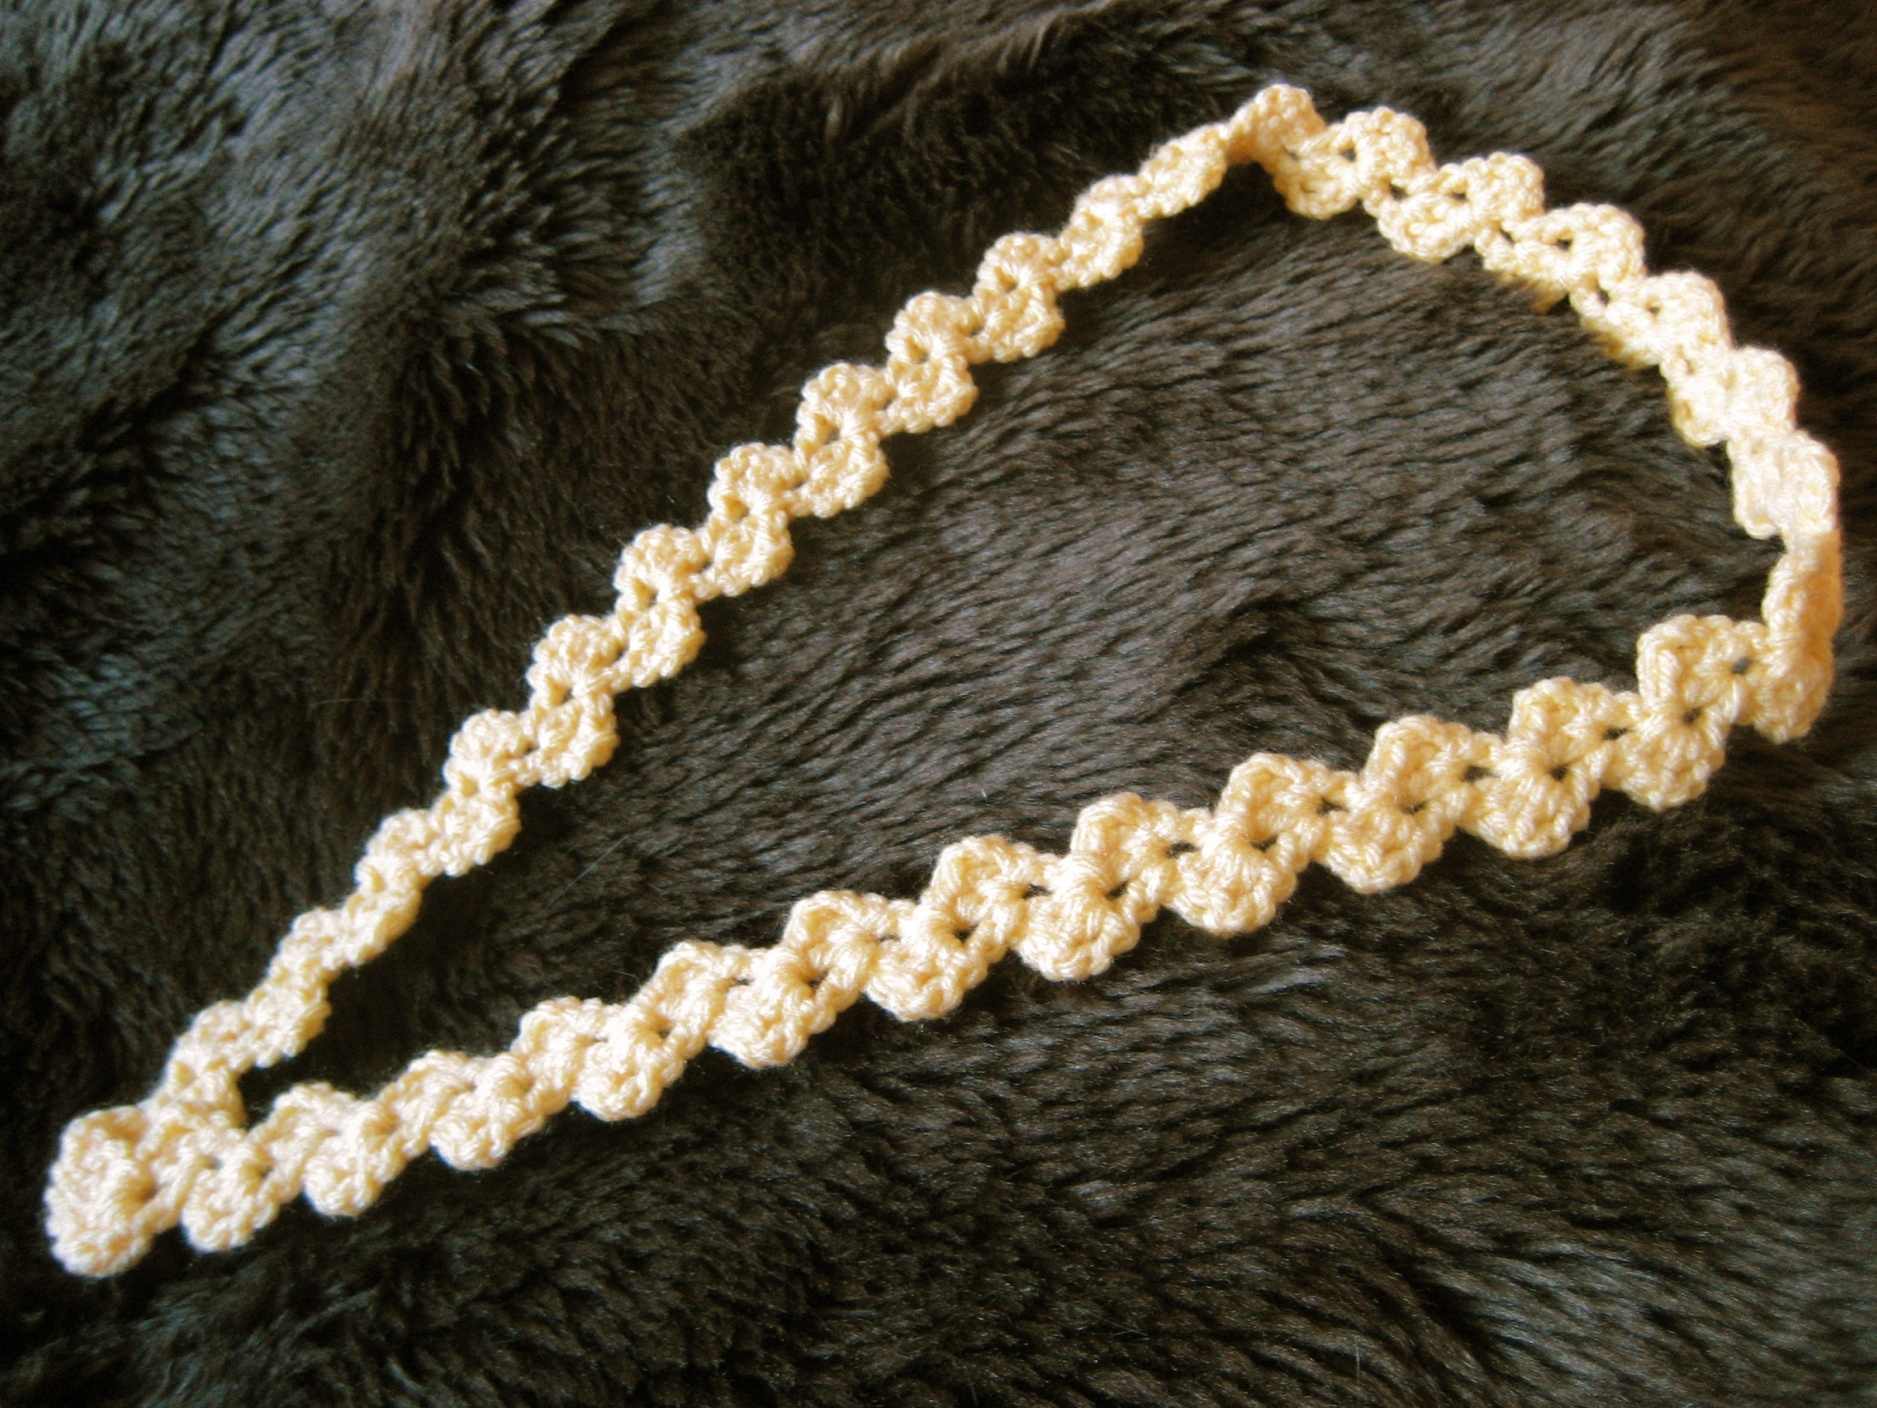 Lanyard Crochet Pattern Some New Projects Ms Premise Conclusion